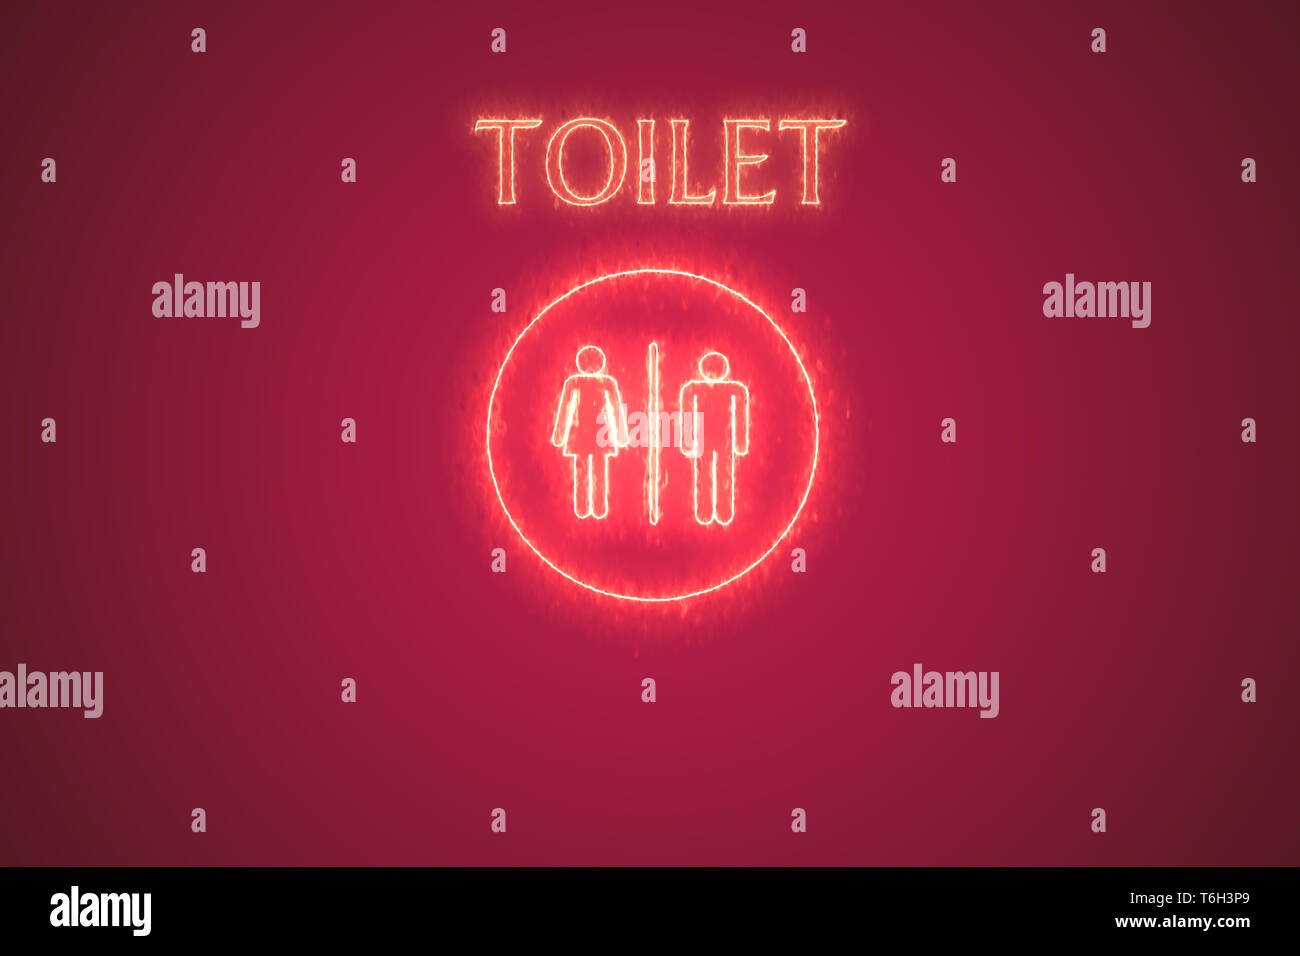 Toilet symbol with fire effect illustration.Hot restroom concept.Male and femal label WC. Stock Photo